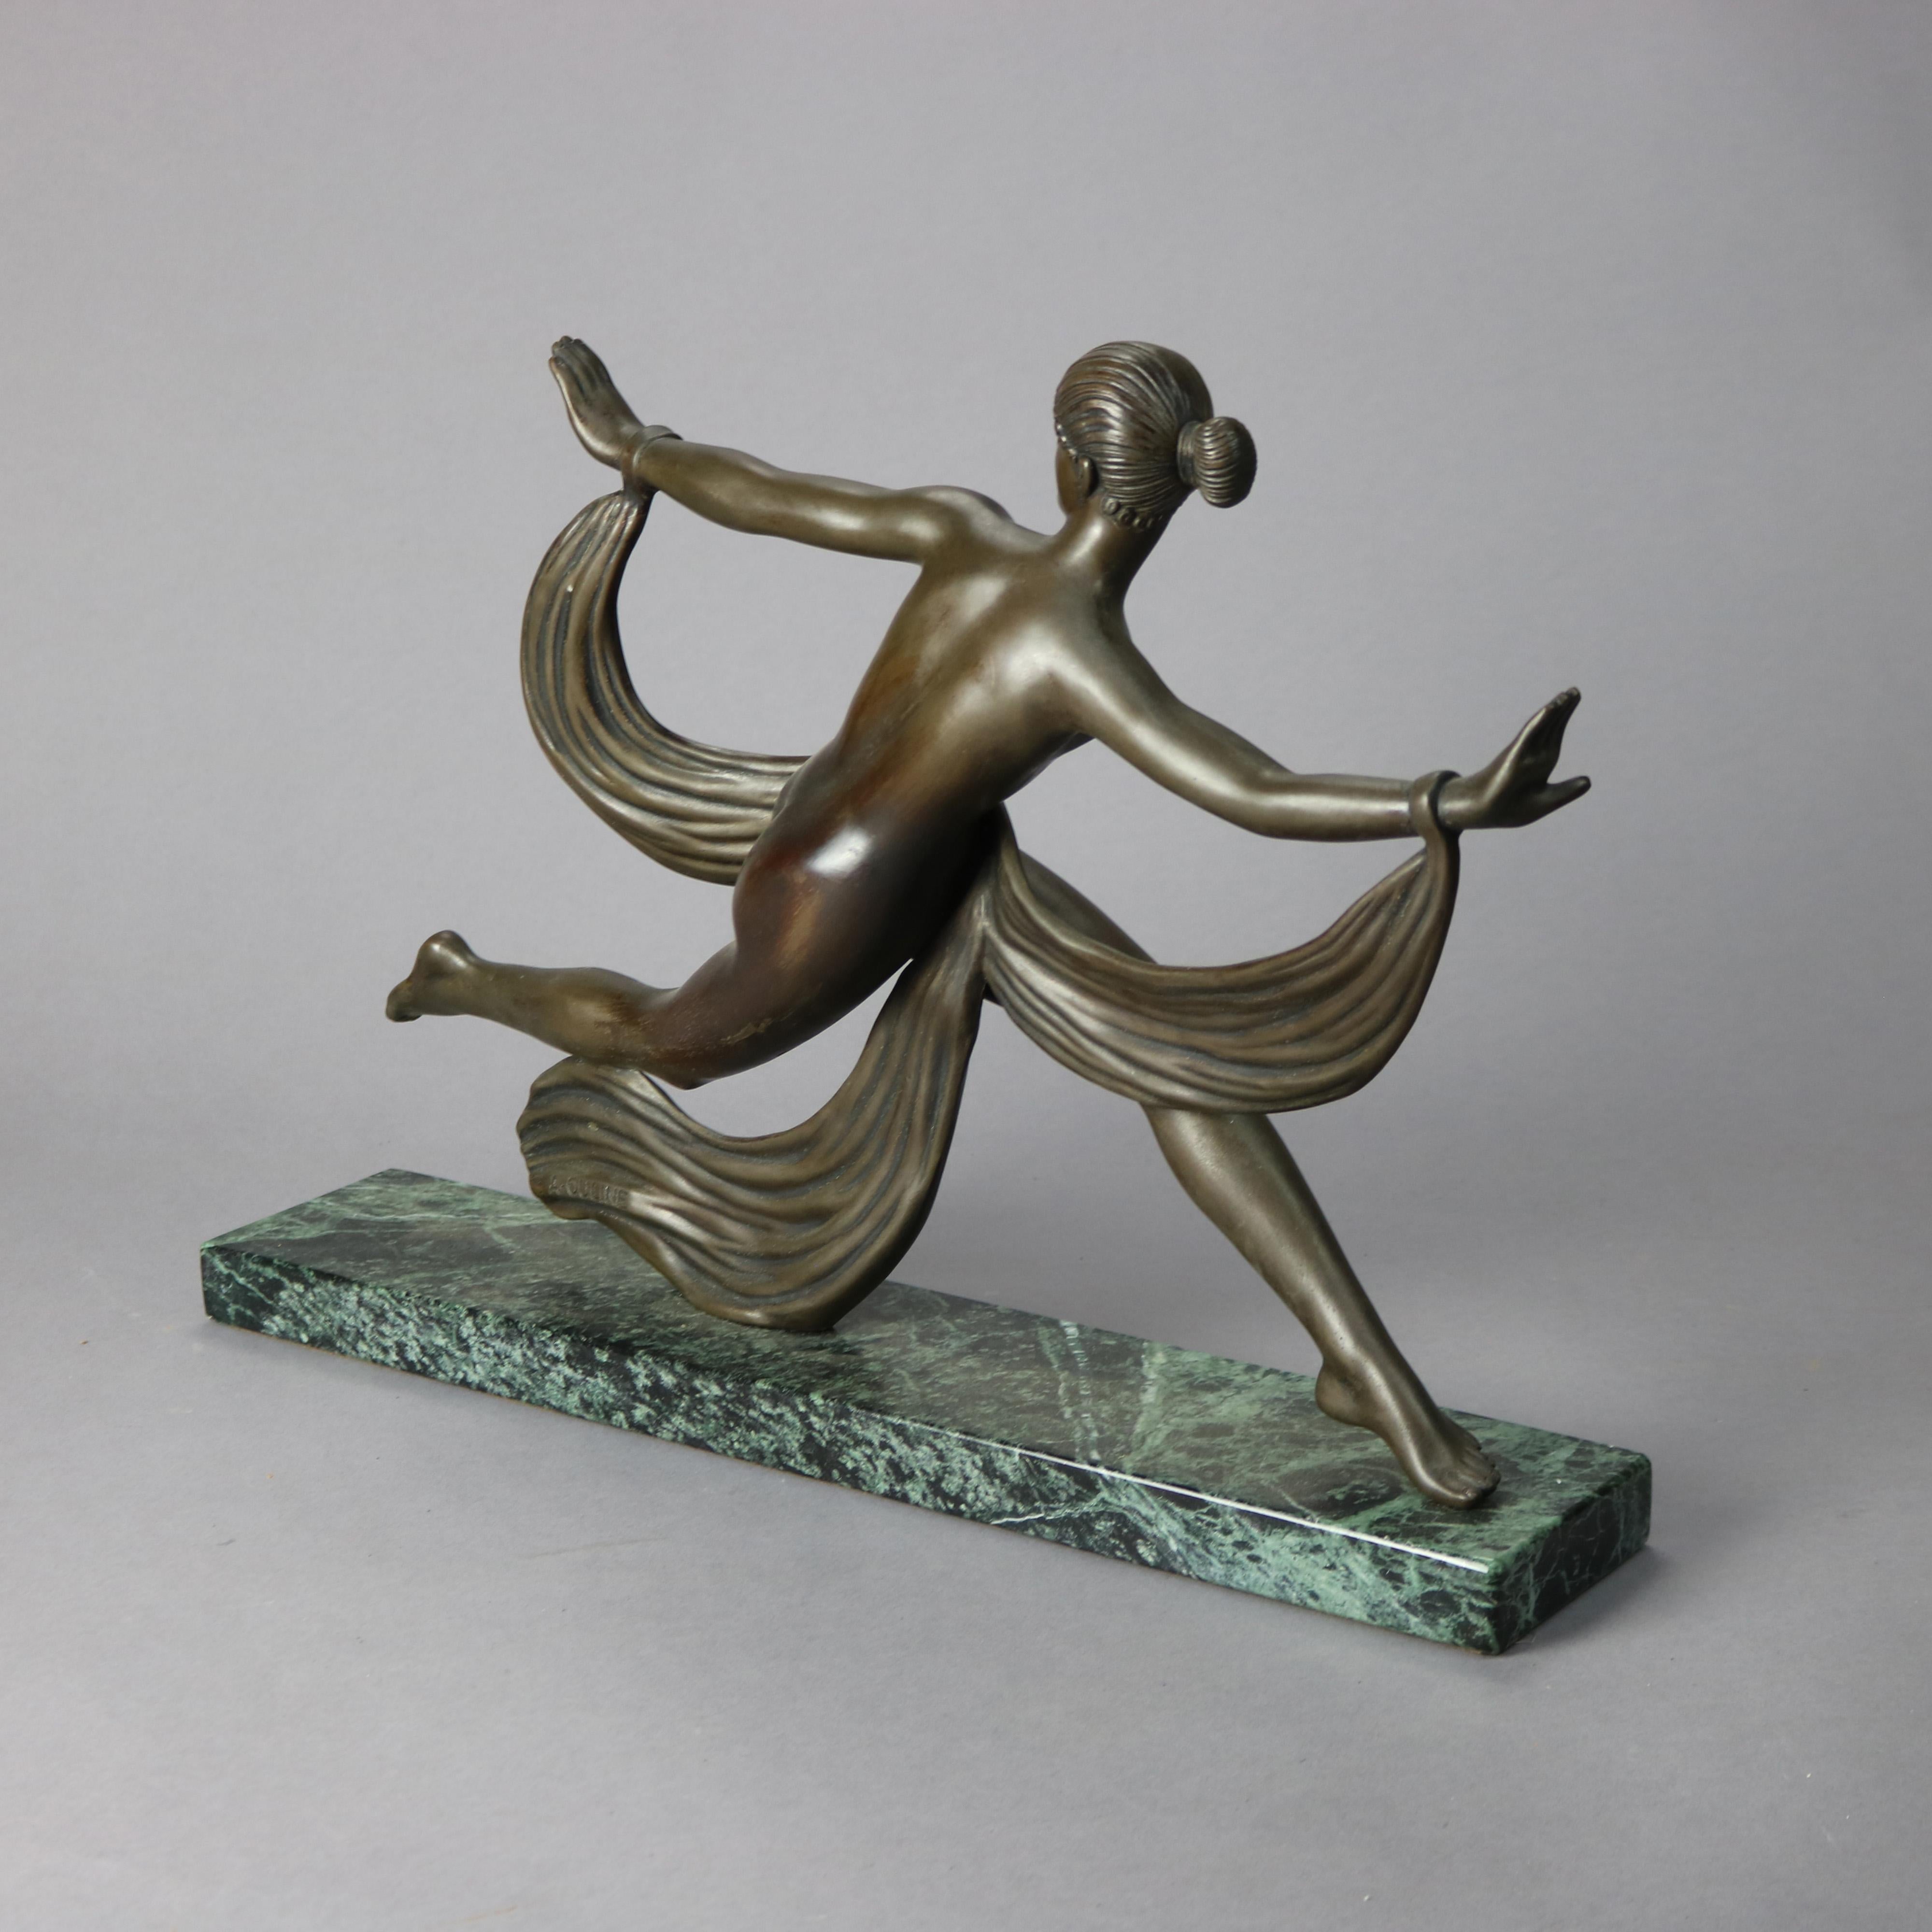 Antique French Art Deco Sculpture Statue of a Woman On Marble Plinth, 20th C. For Sale 10